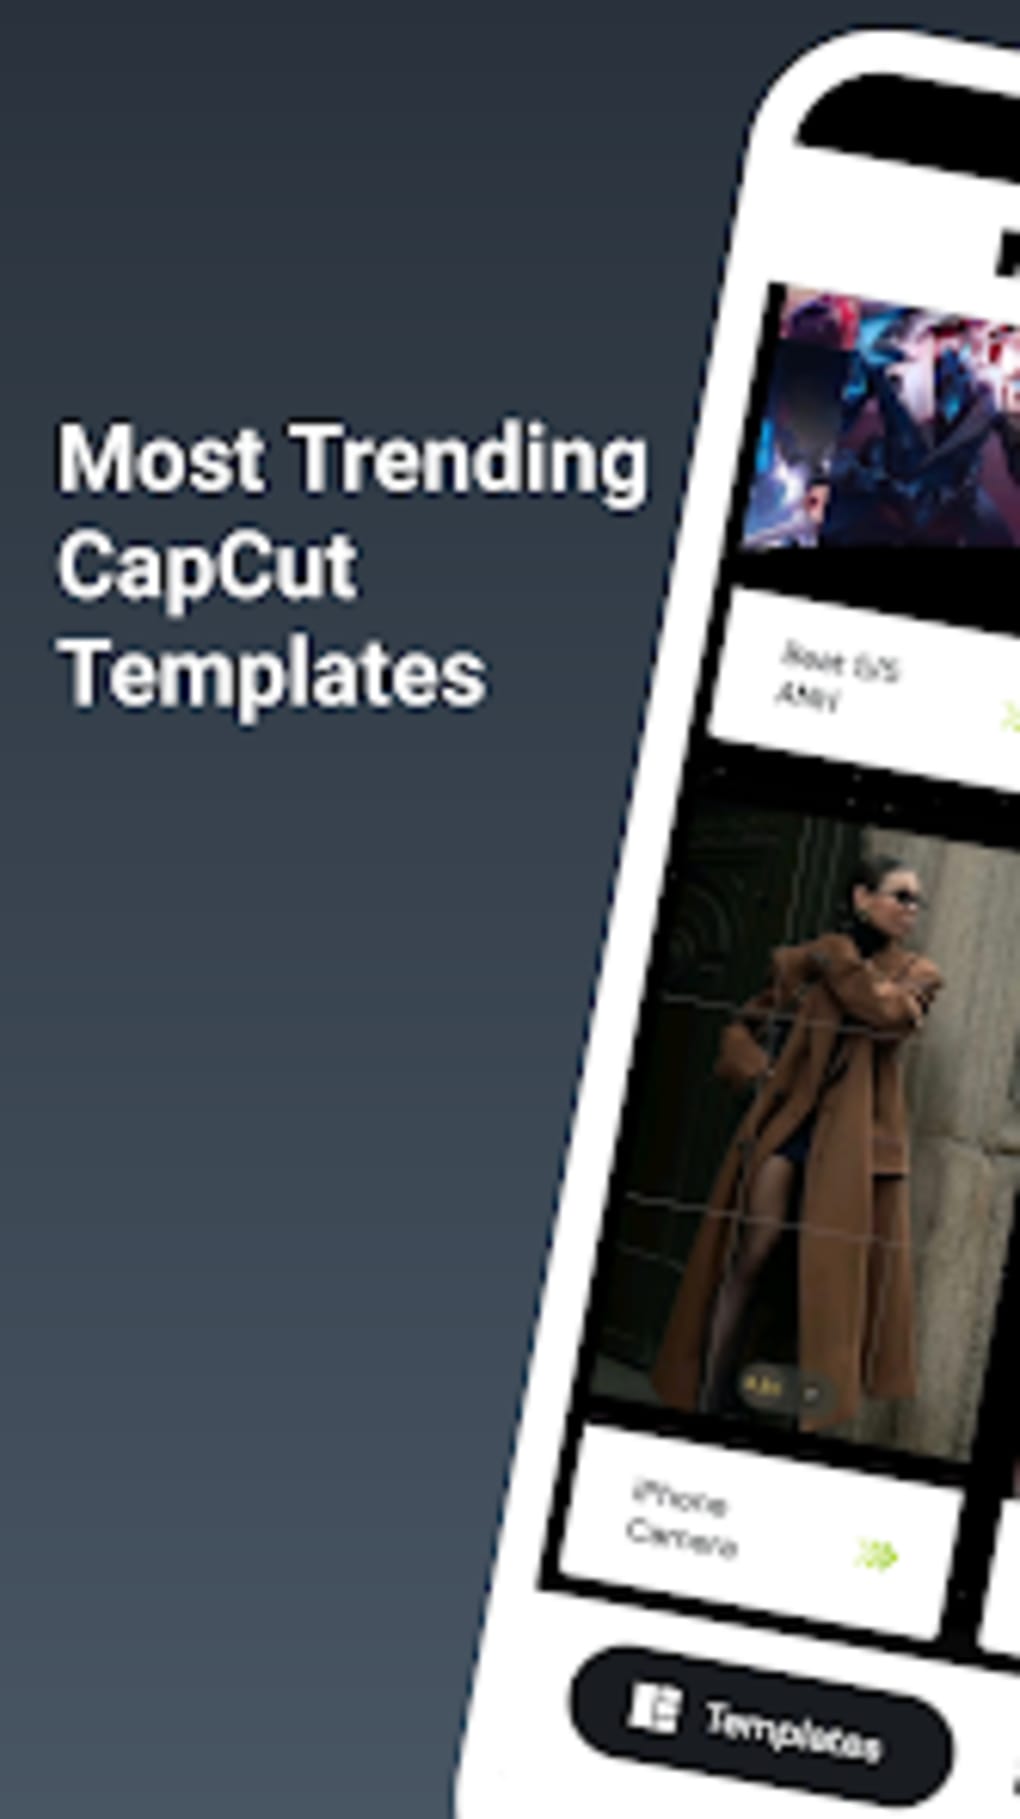 capcut-templates-download-for-android